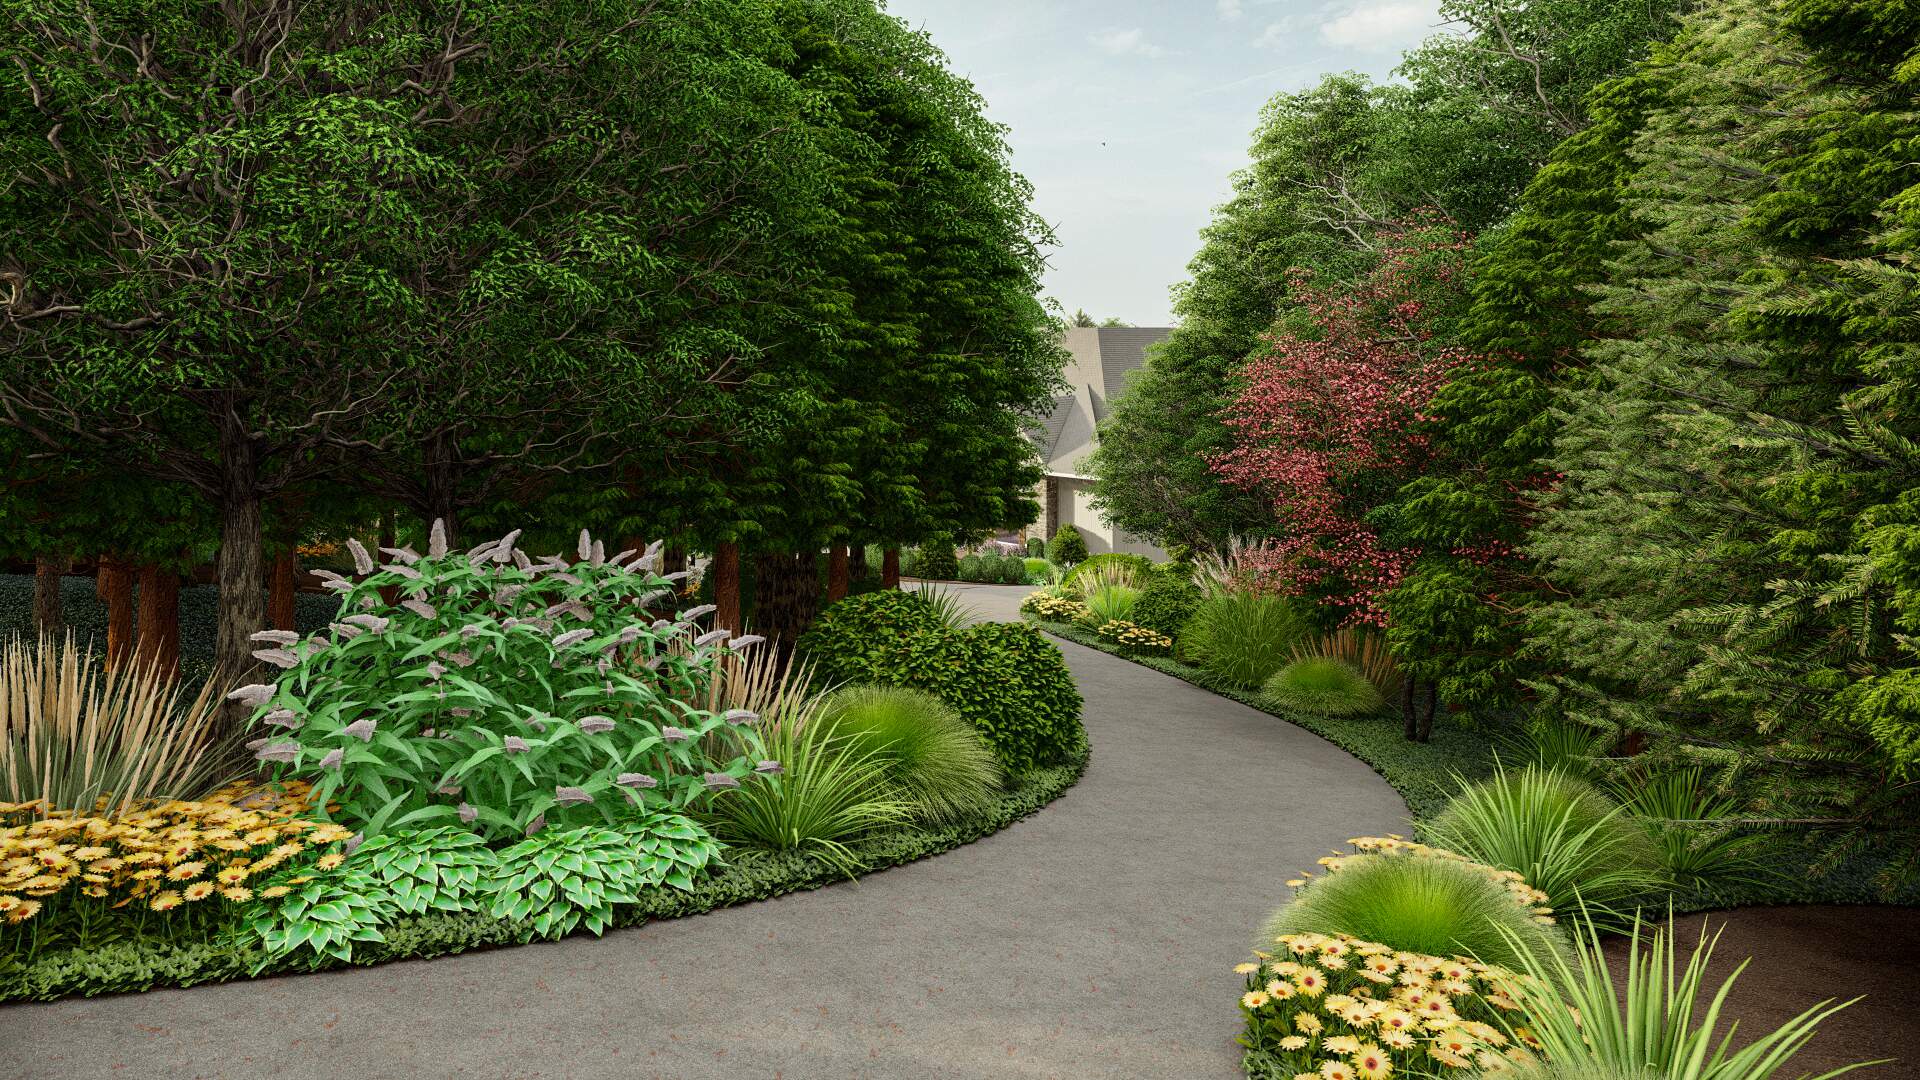 Serene garden pathway lined with a variety of lush trees, shrubs, and flowering plants leading to a traditional home